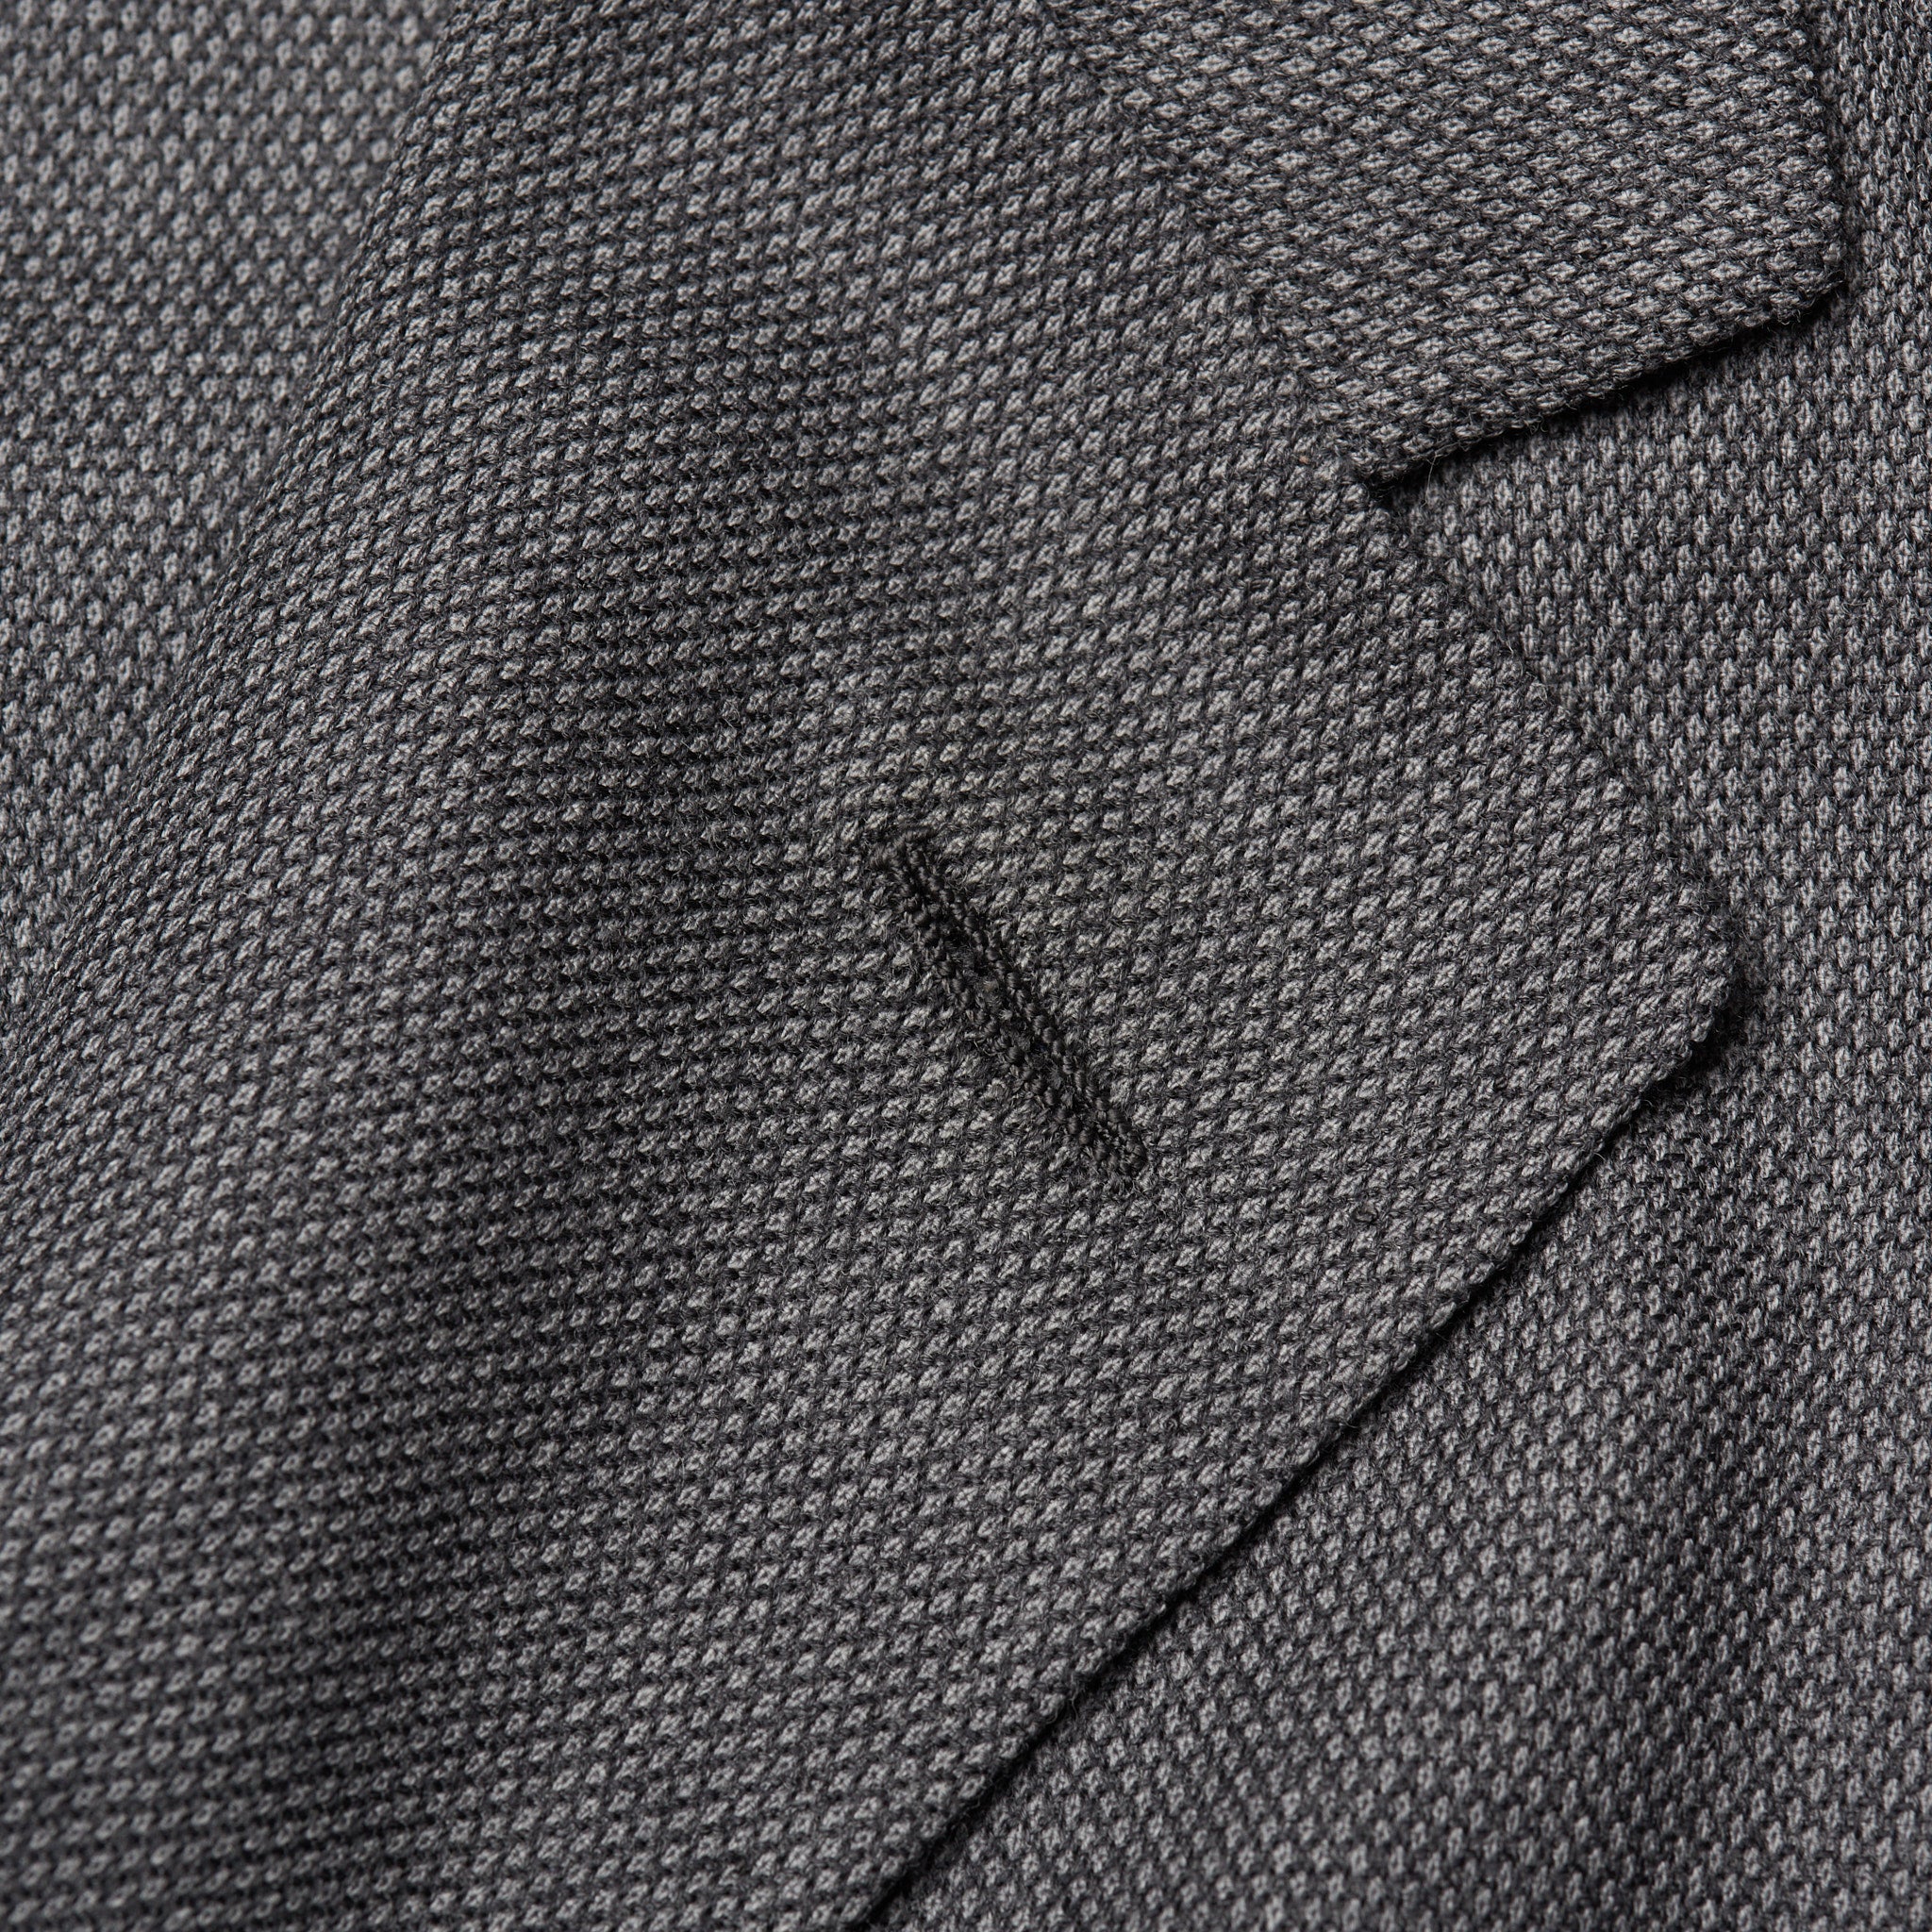 D'AVENZA Roma Handmade Gray Wool Unconstructed Suit EU 50 NEW US 40 D'AVENZA